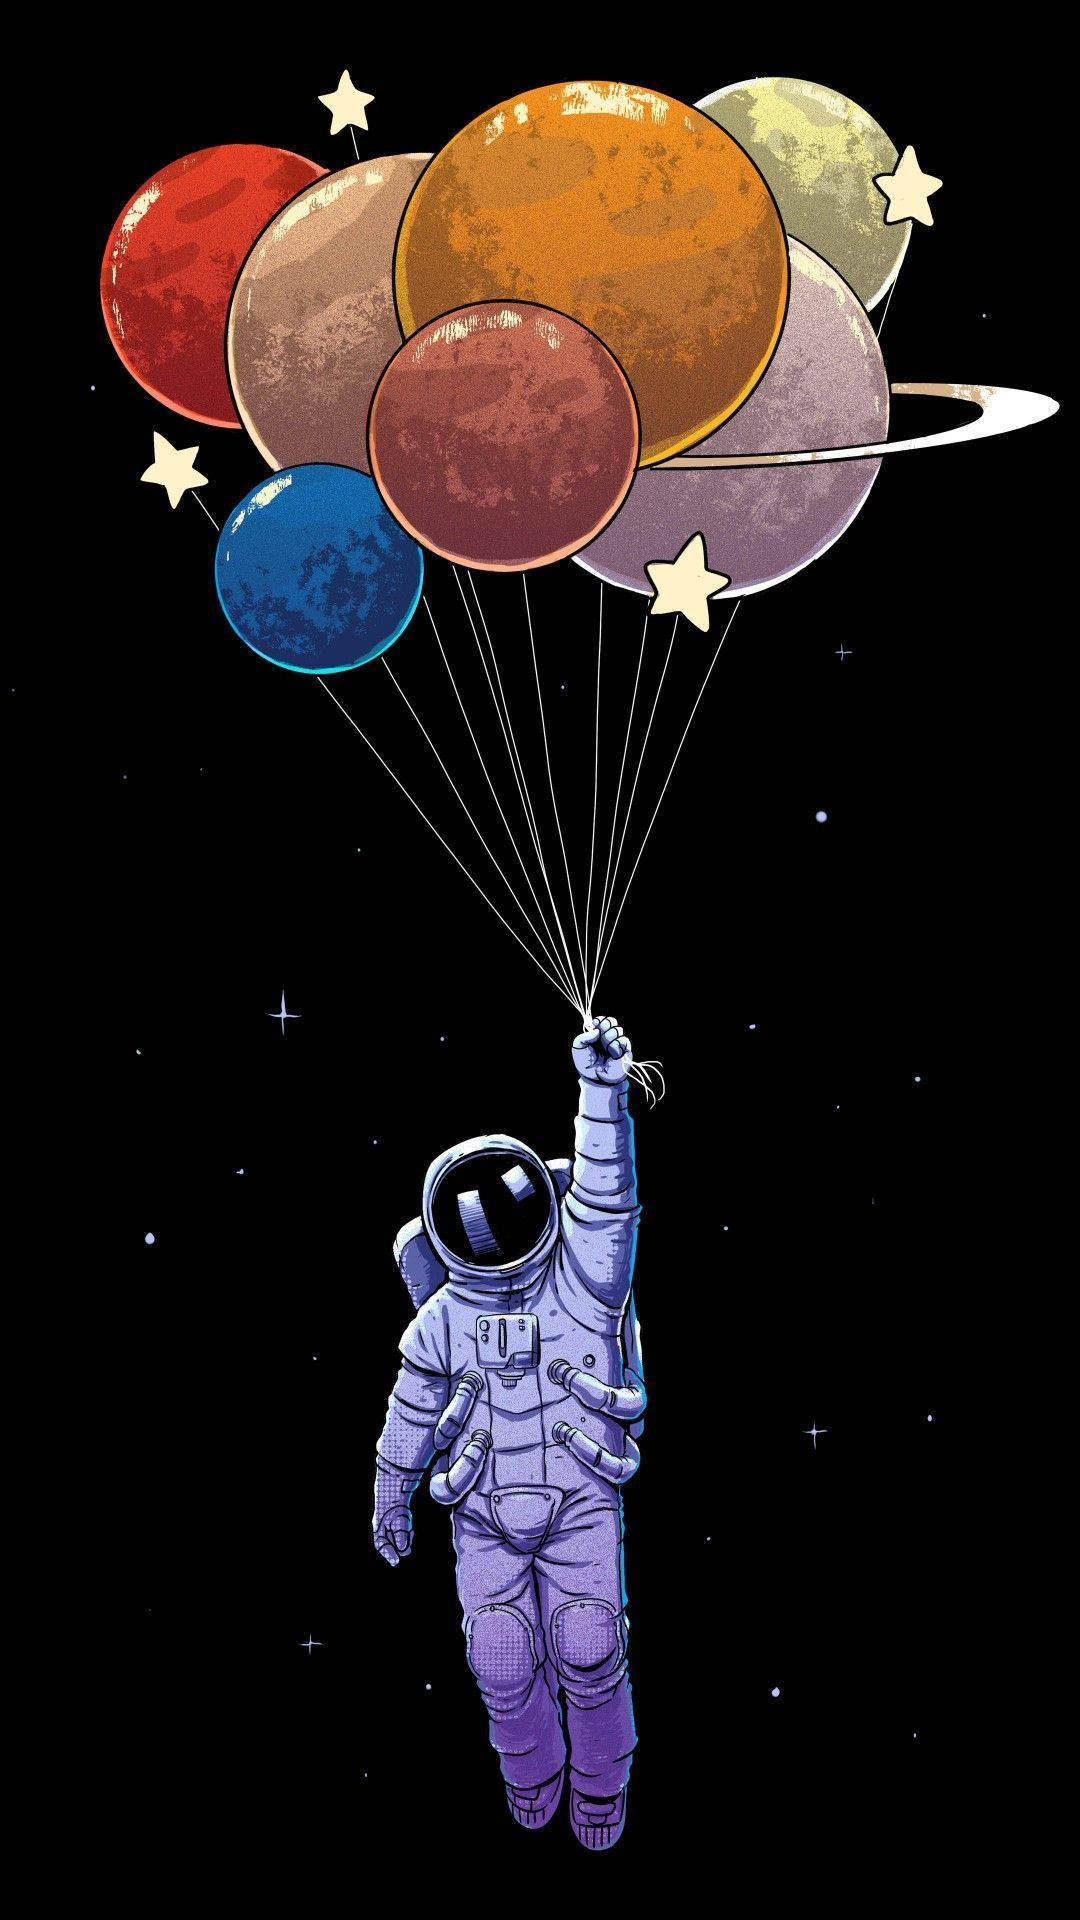 Cartoon Astronaut With Planet Balloons